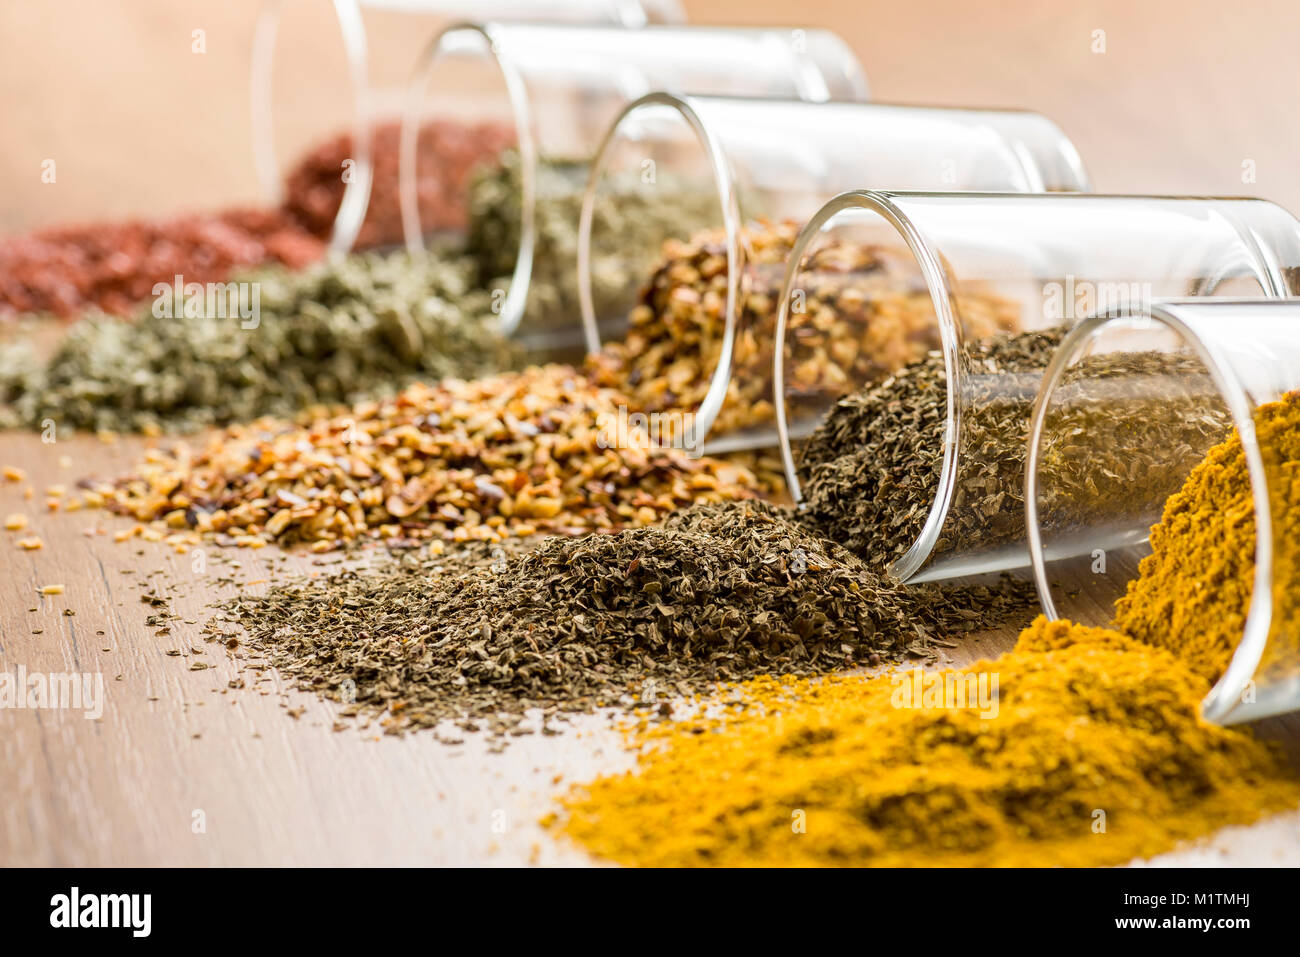 glass jars with various spices on wooden table, closeup on oregano. Stock Photo